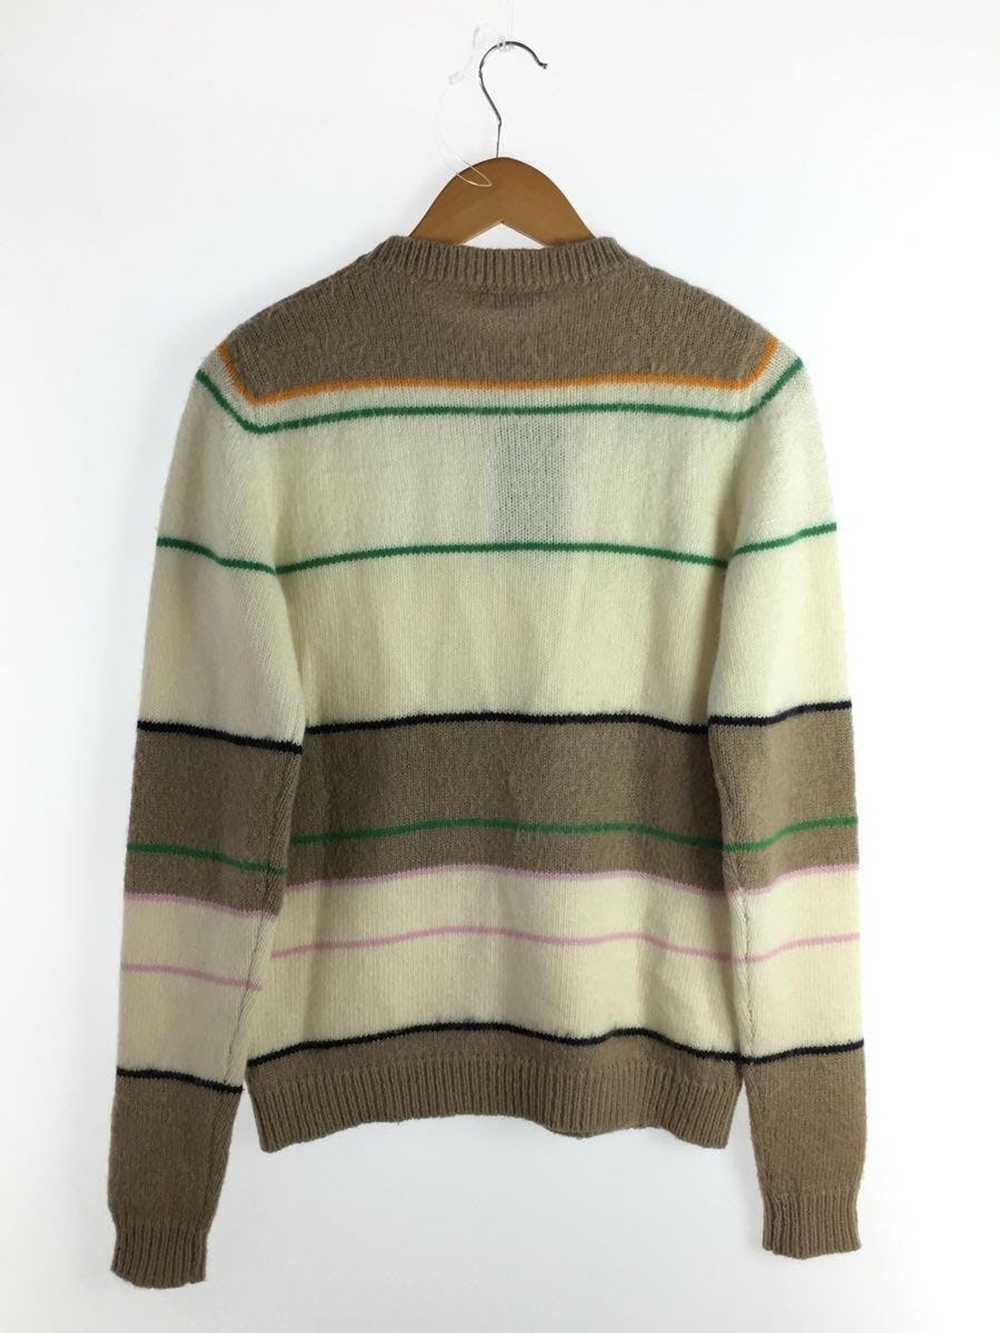 Acne Studios Mohair Wool Knit Sweater - image 2